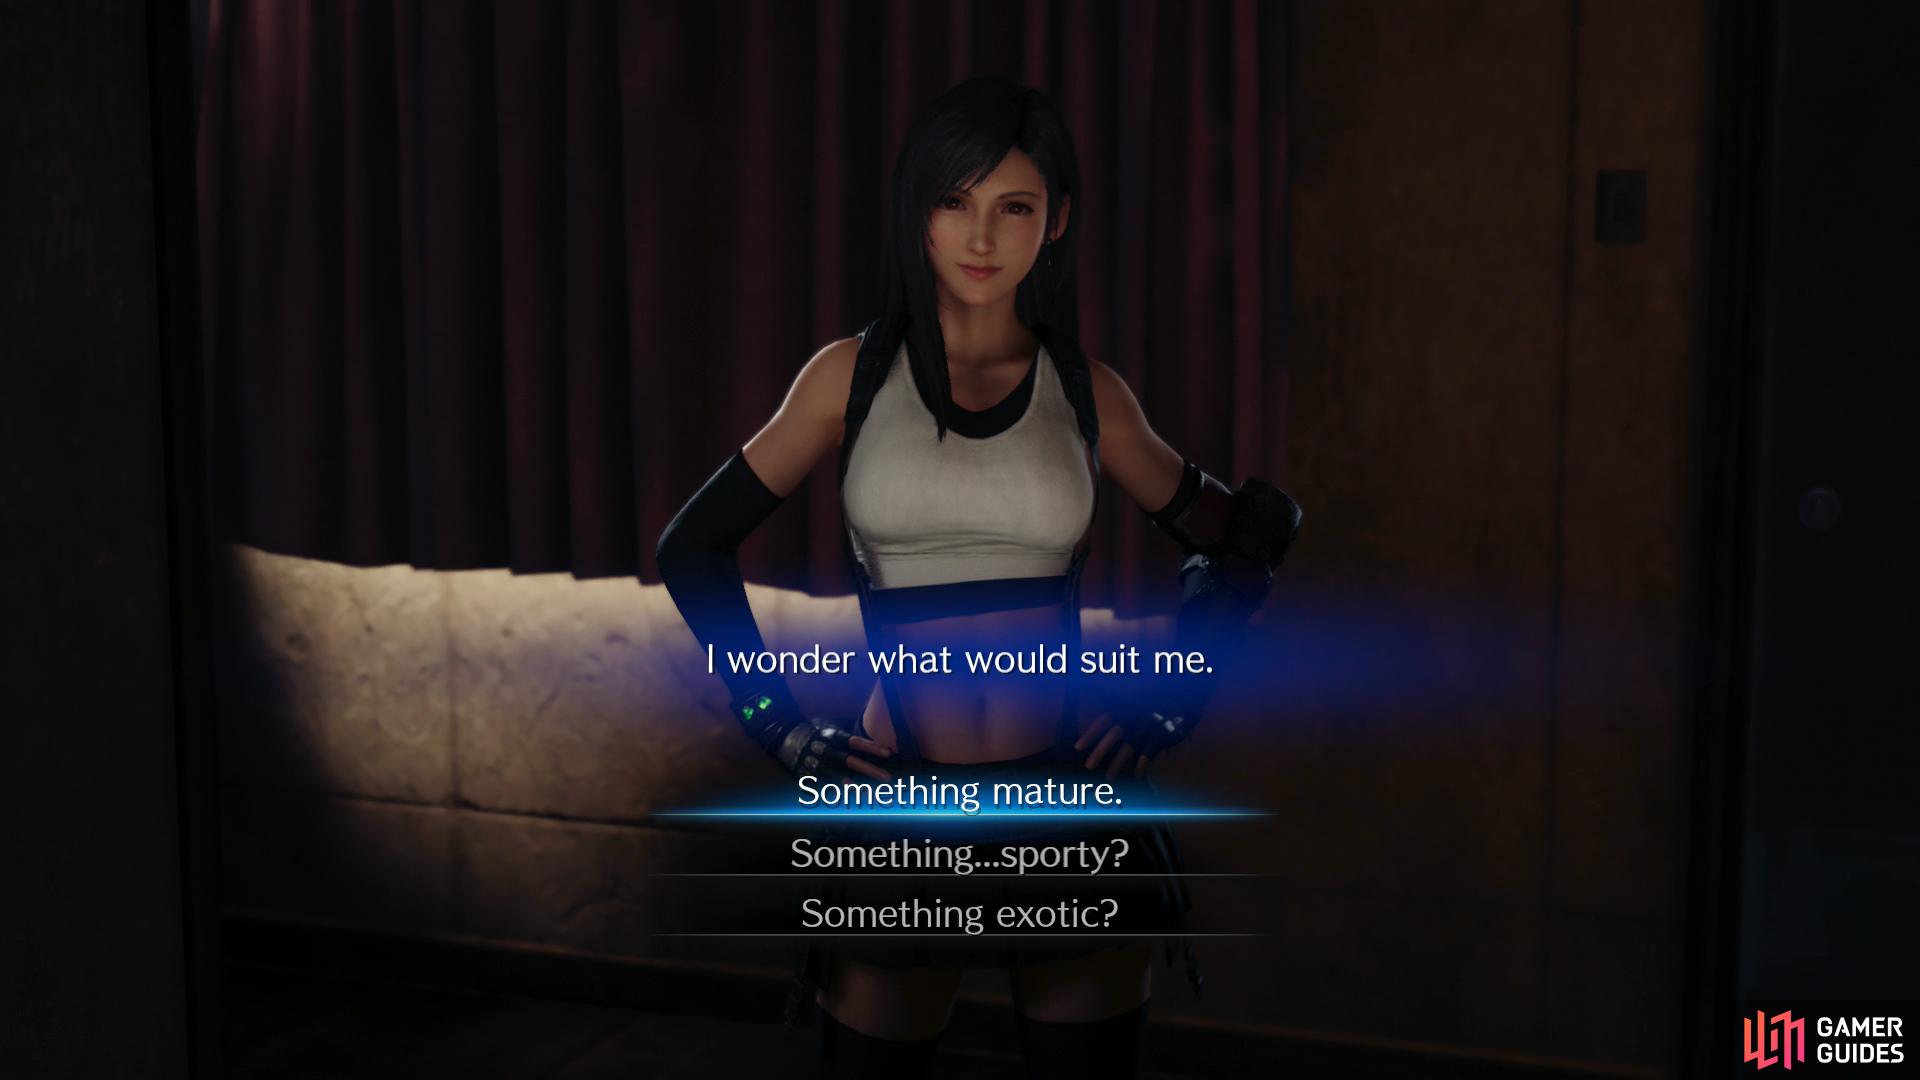 If you complete all the quests in Chapter 3 you'll be able to spend some quality time with Tifa, where your opinion may have some far-reaching consequences…